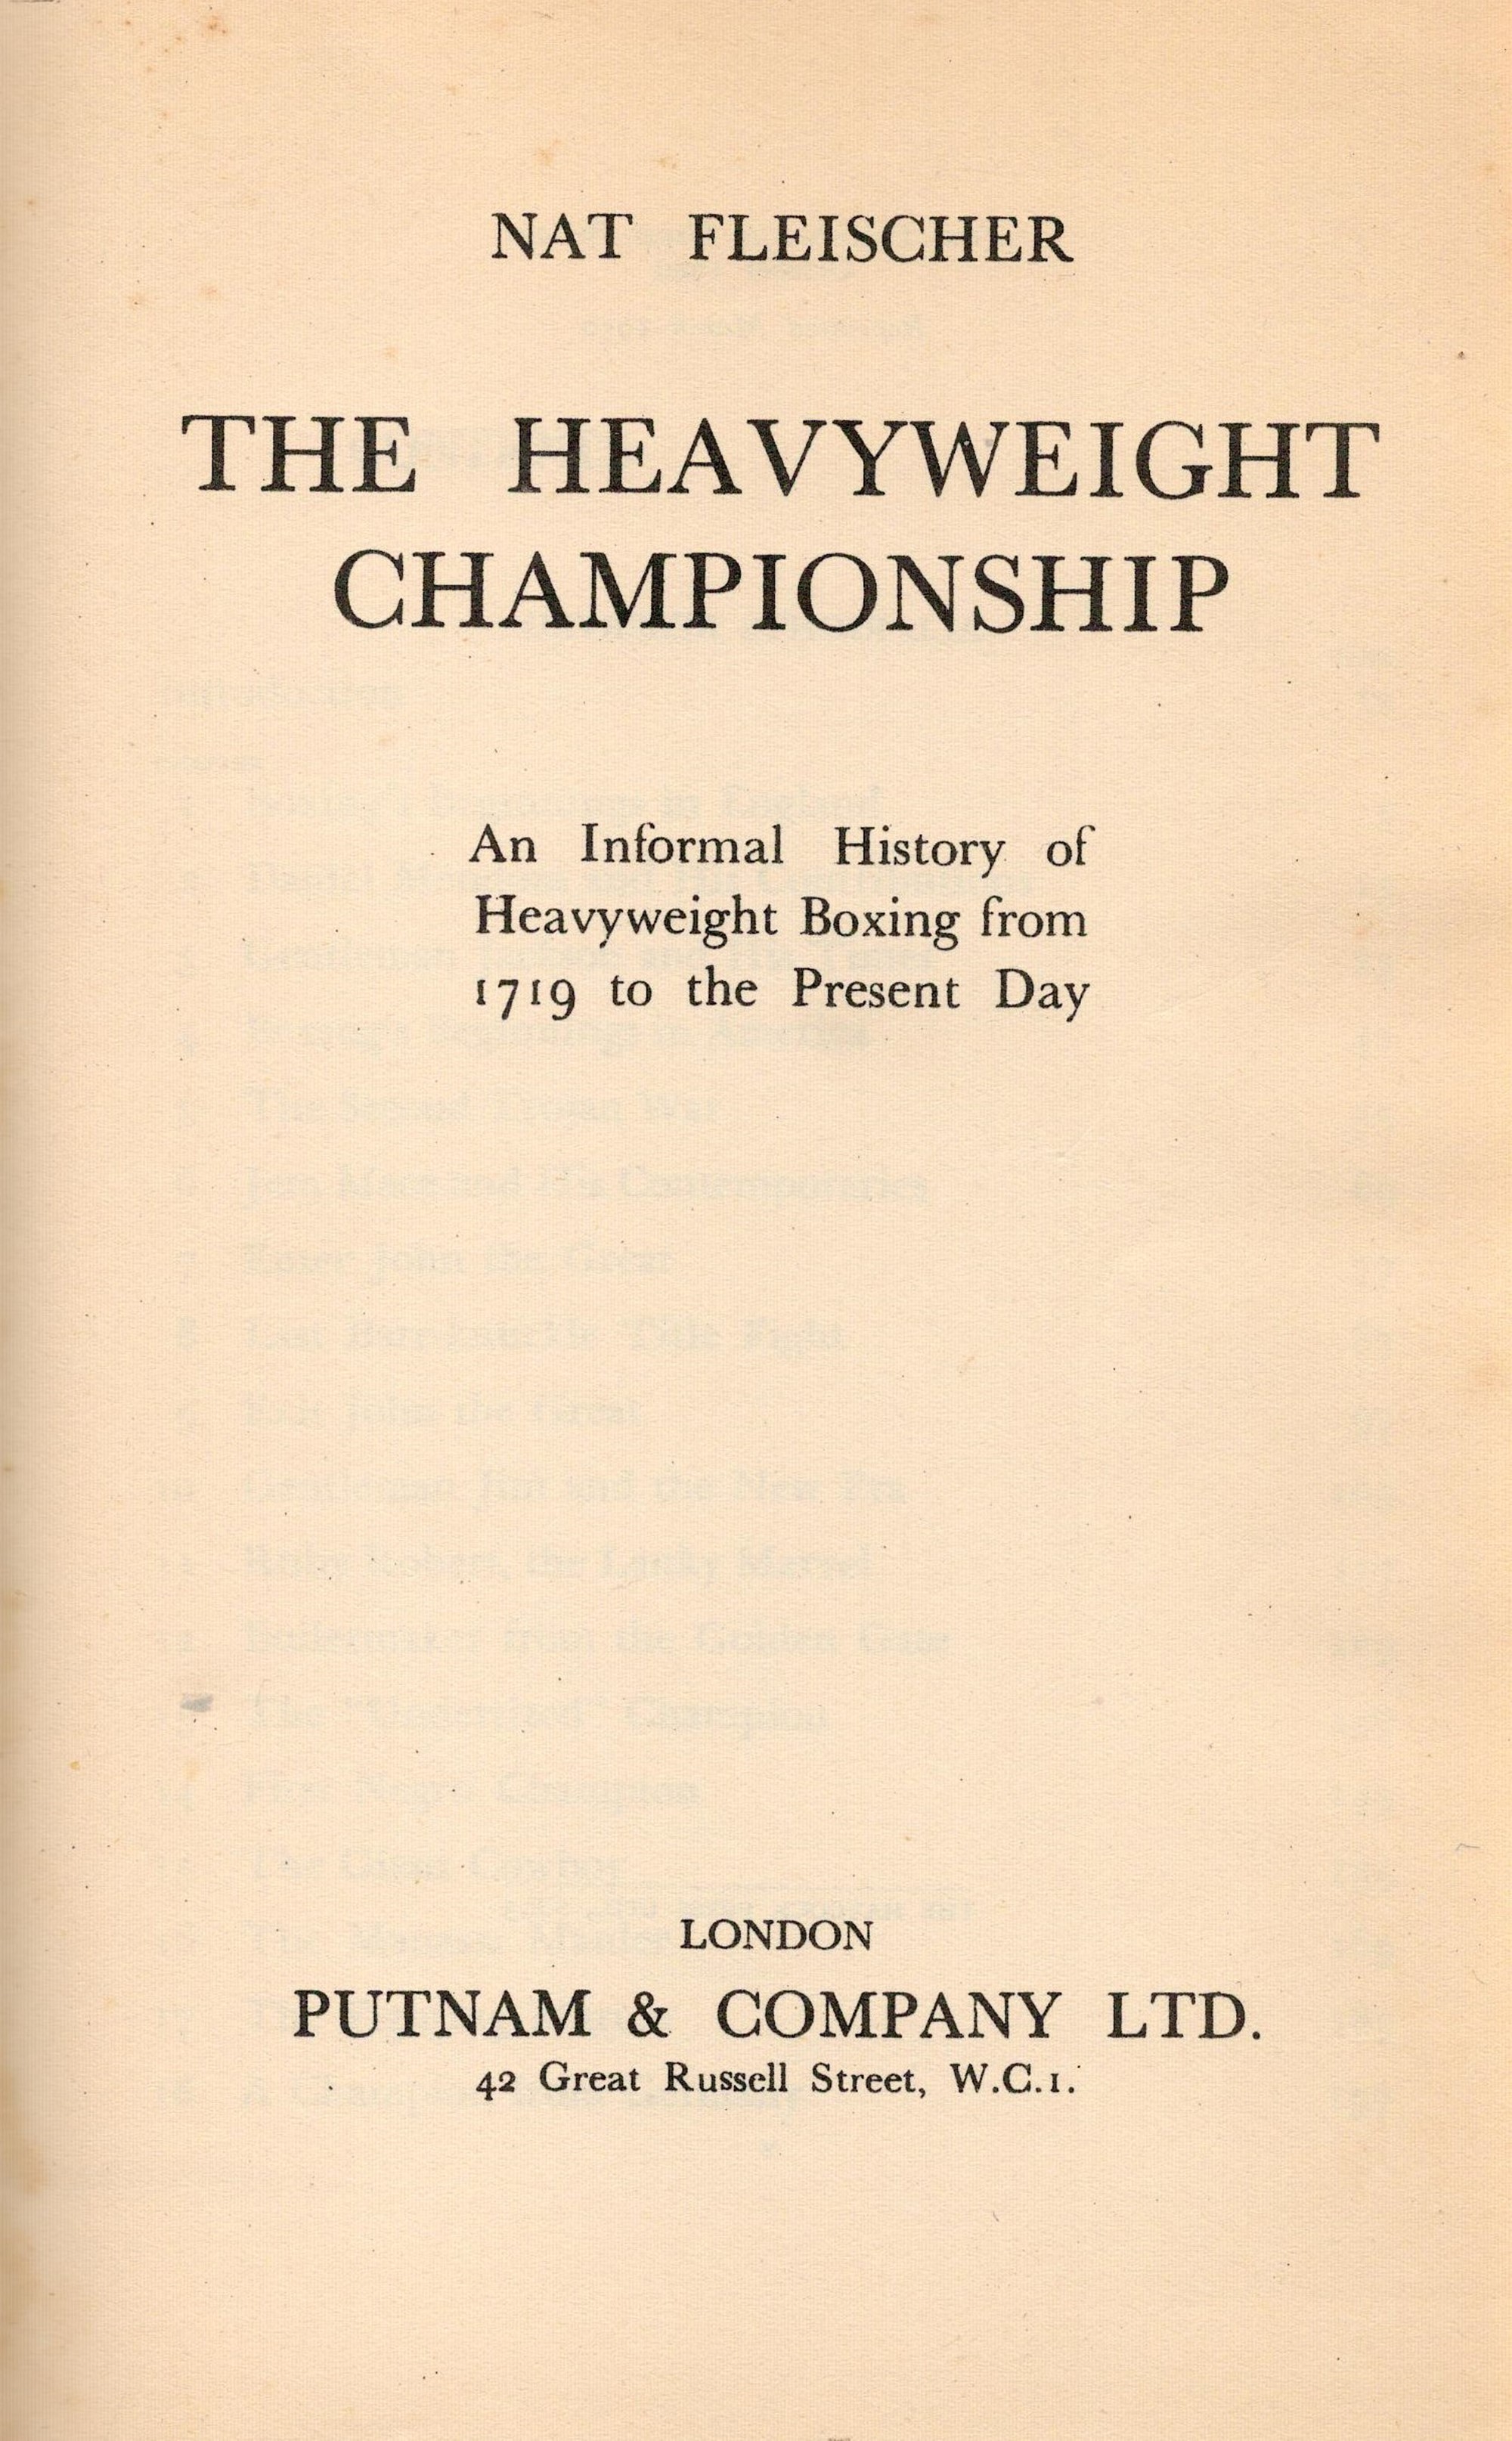 The Heavyweight Championship by Nat Fleischer Hardback Book 1950 Second Edition published by - Image 2 of 3